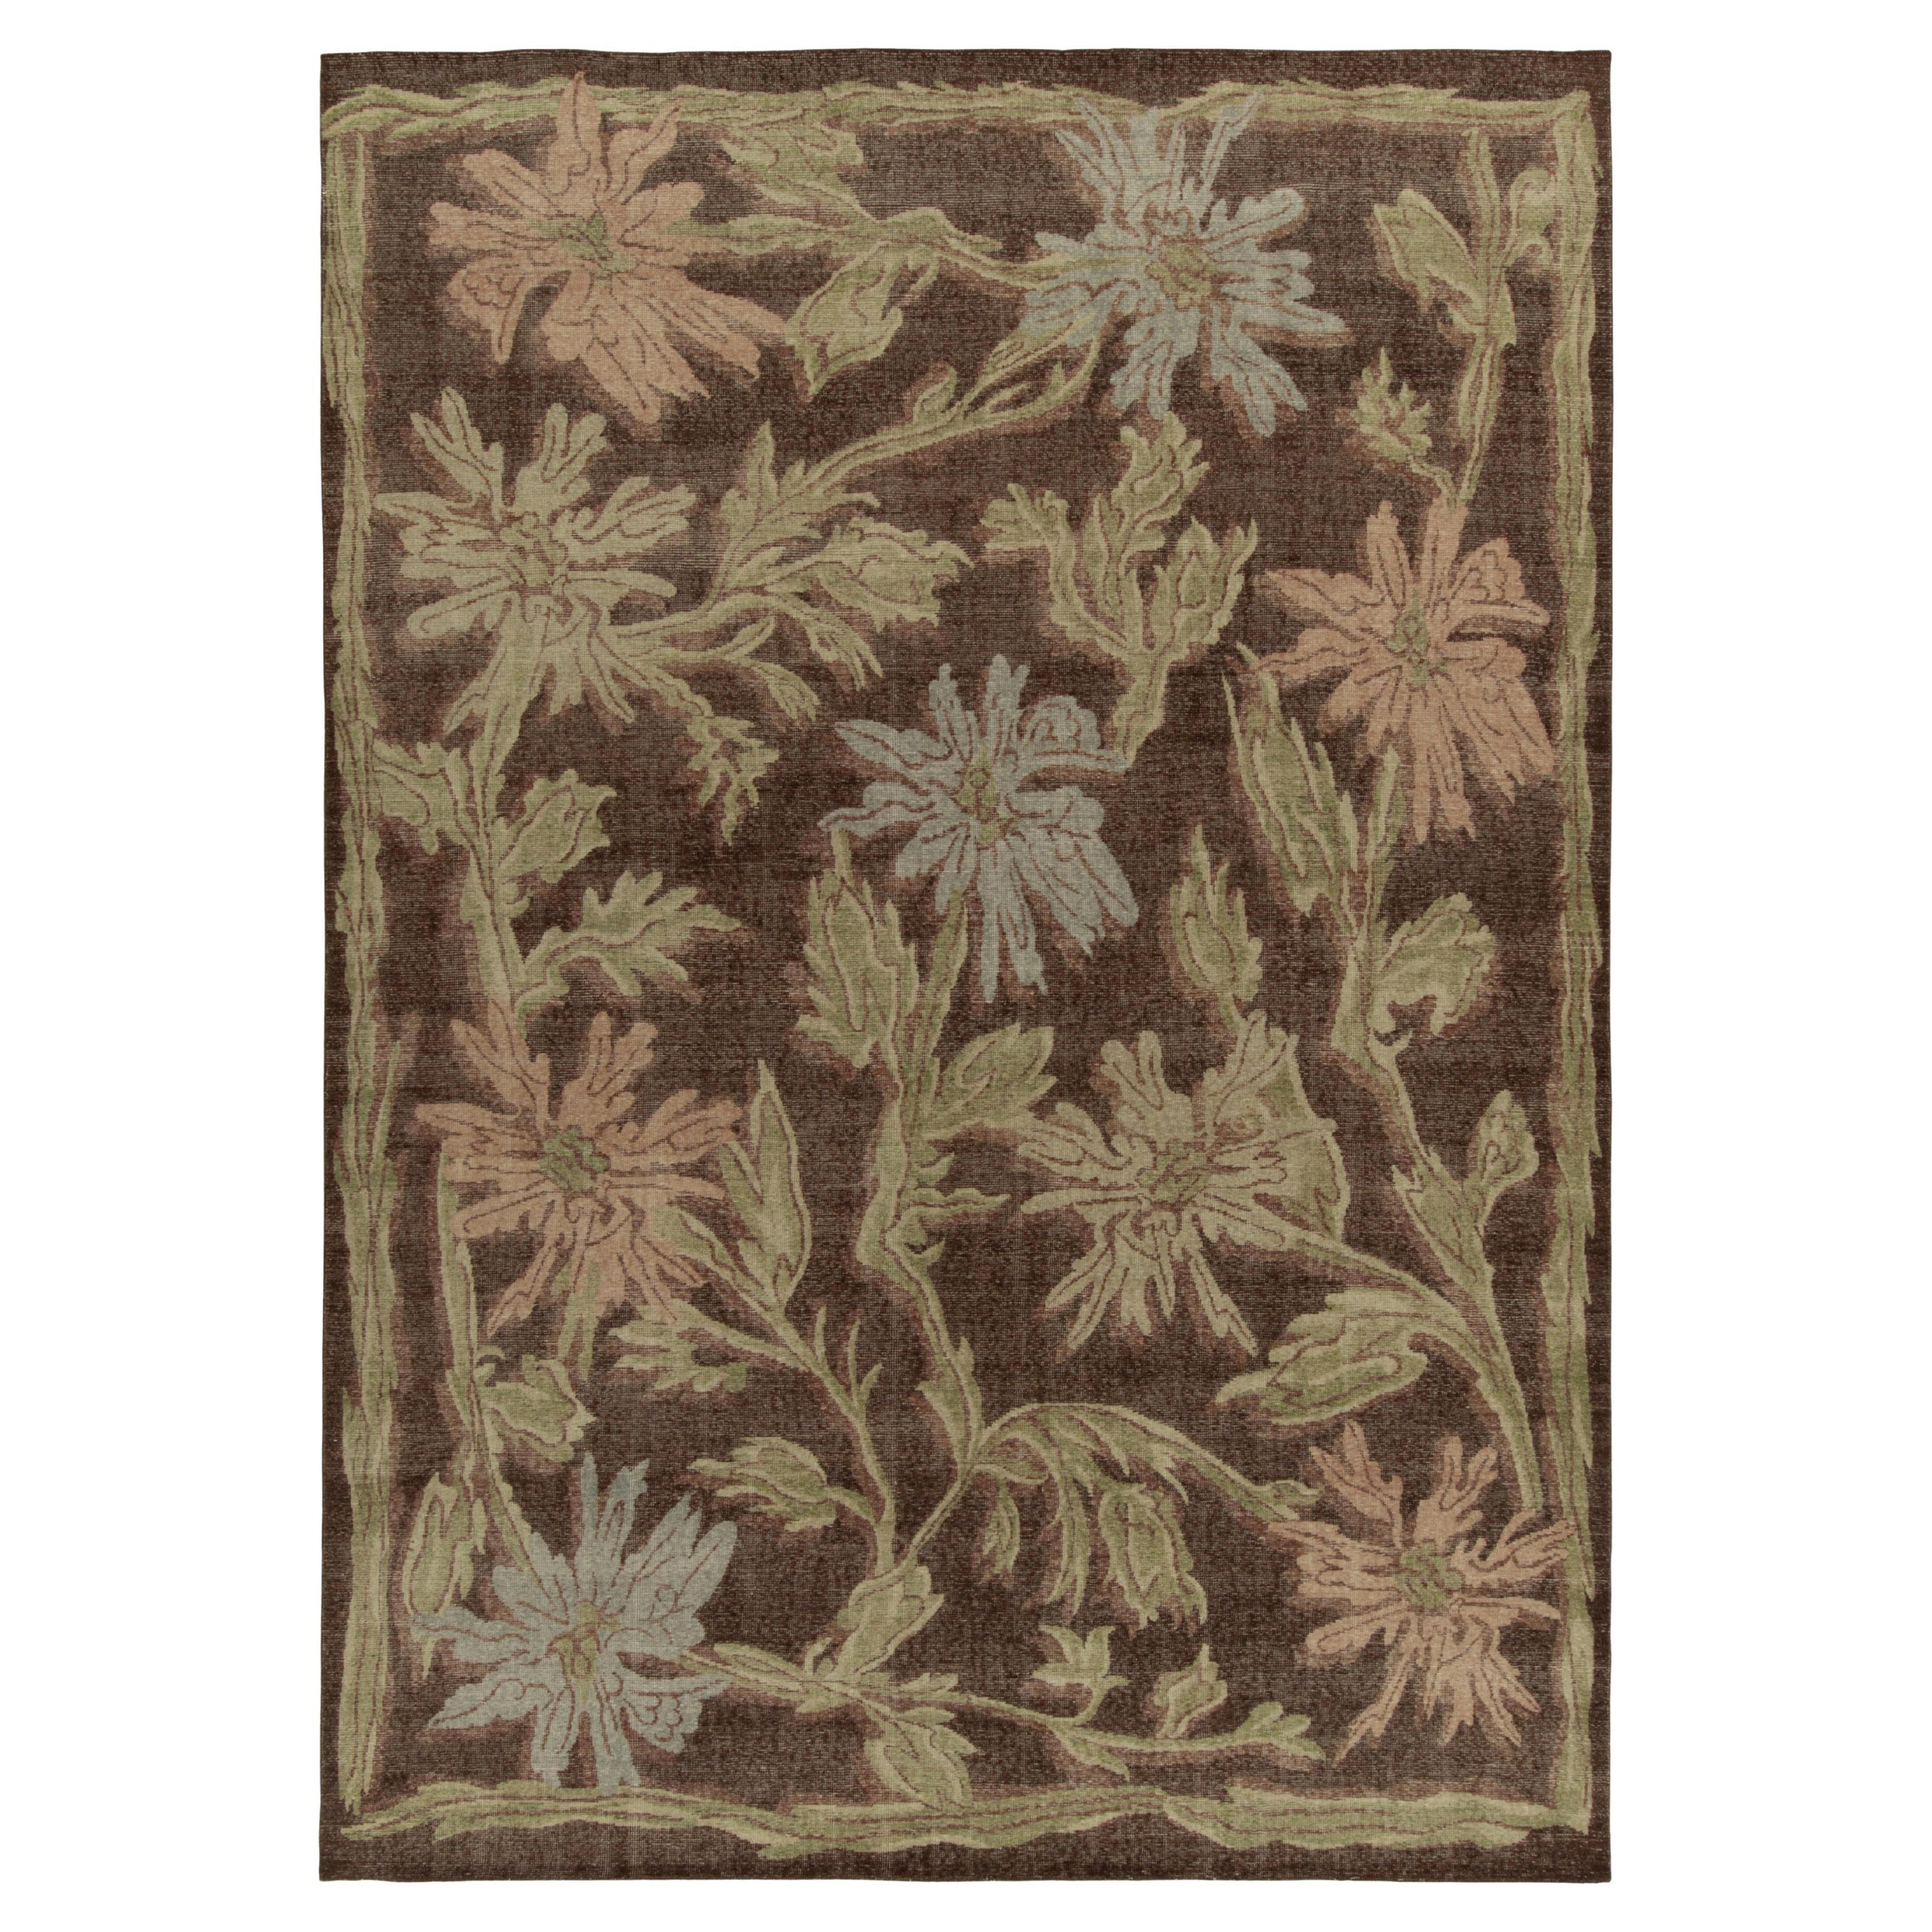 Rug & Kilim’s Distressed Style Rug in Brown and Green Floral Patterns For Sale